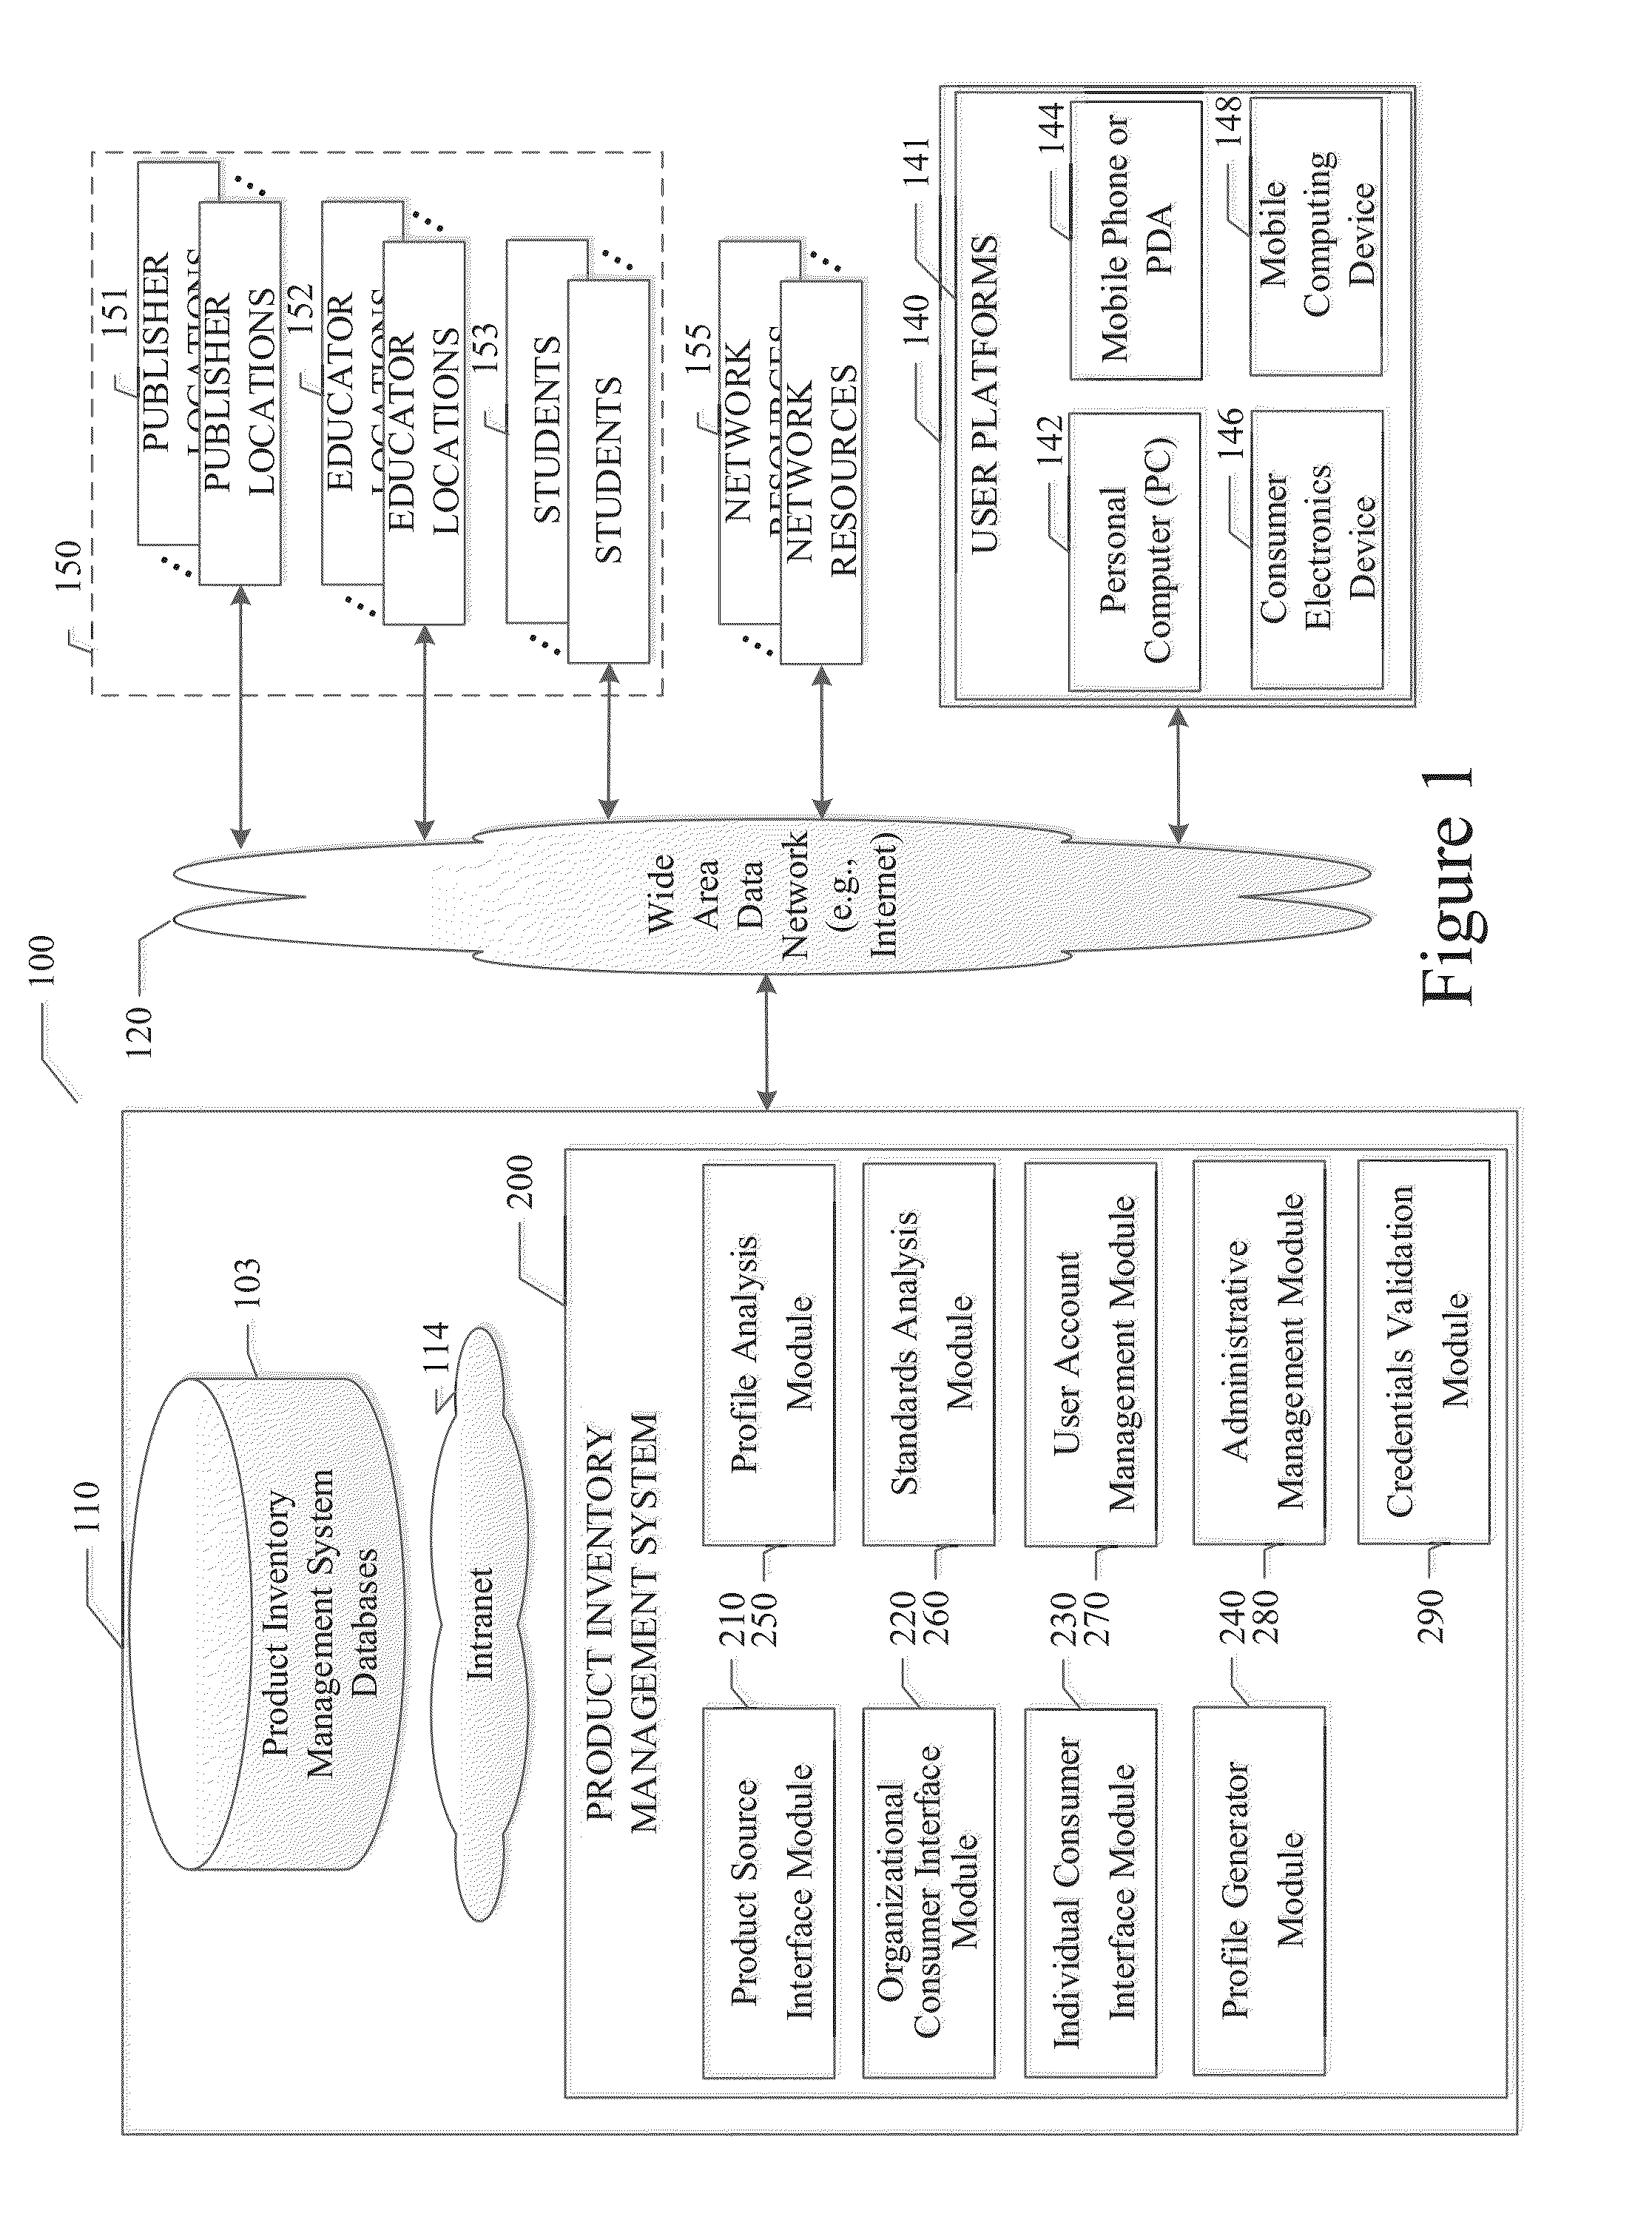 System and method for providing an information platform with credentials validation